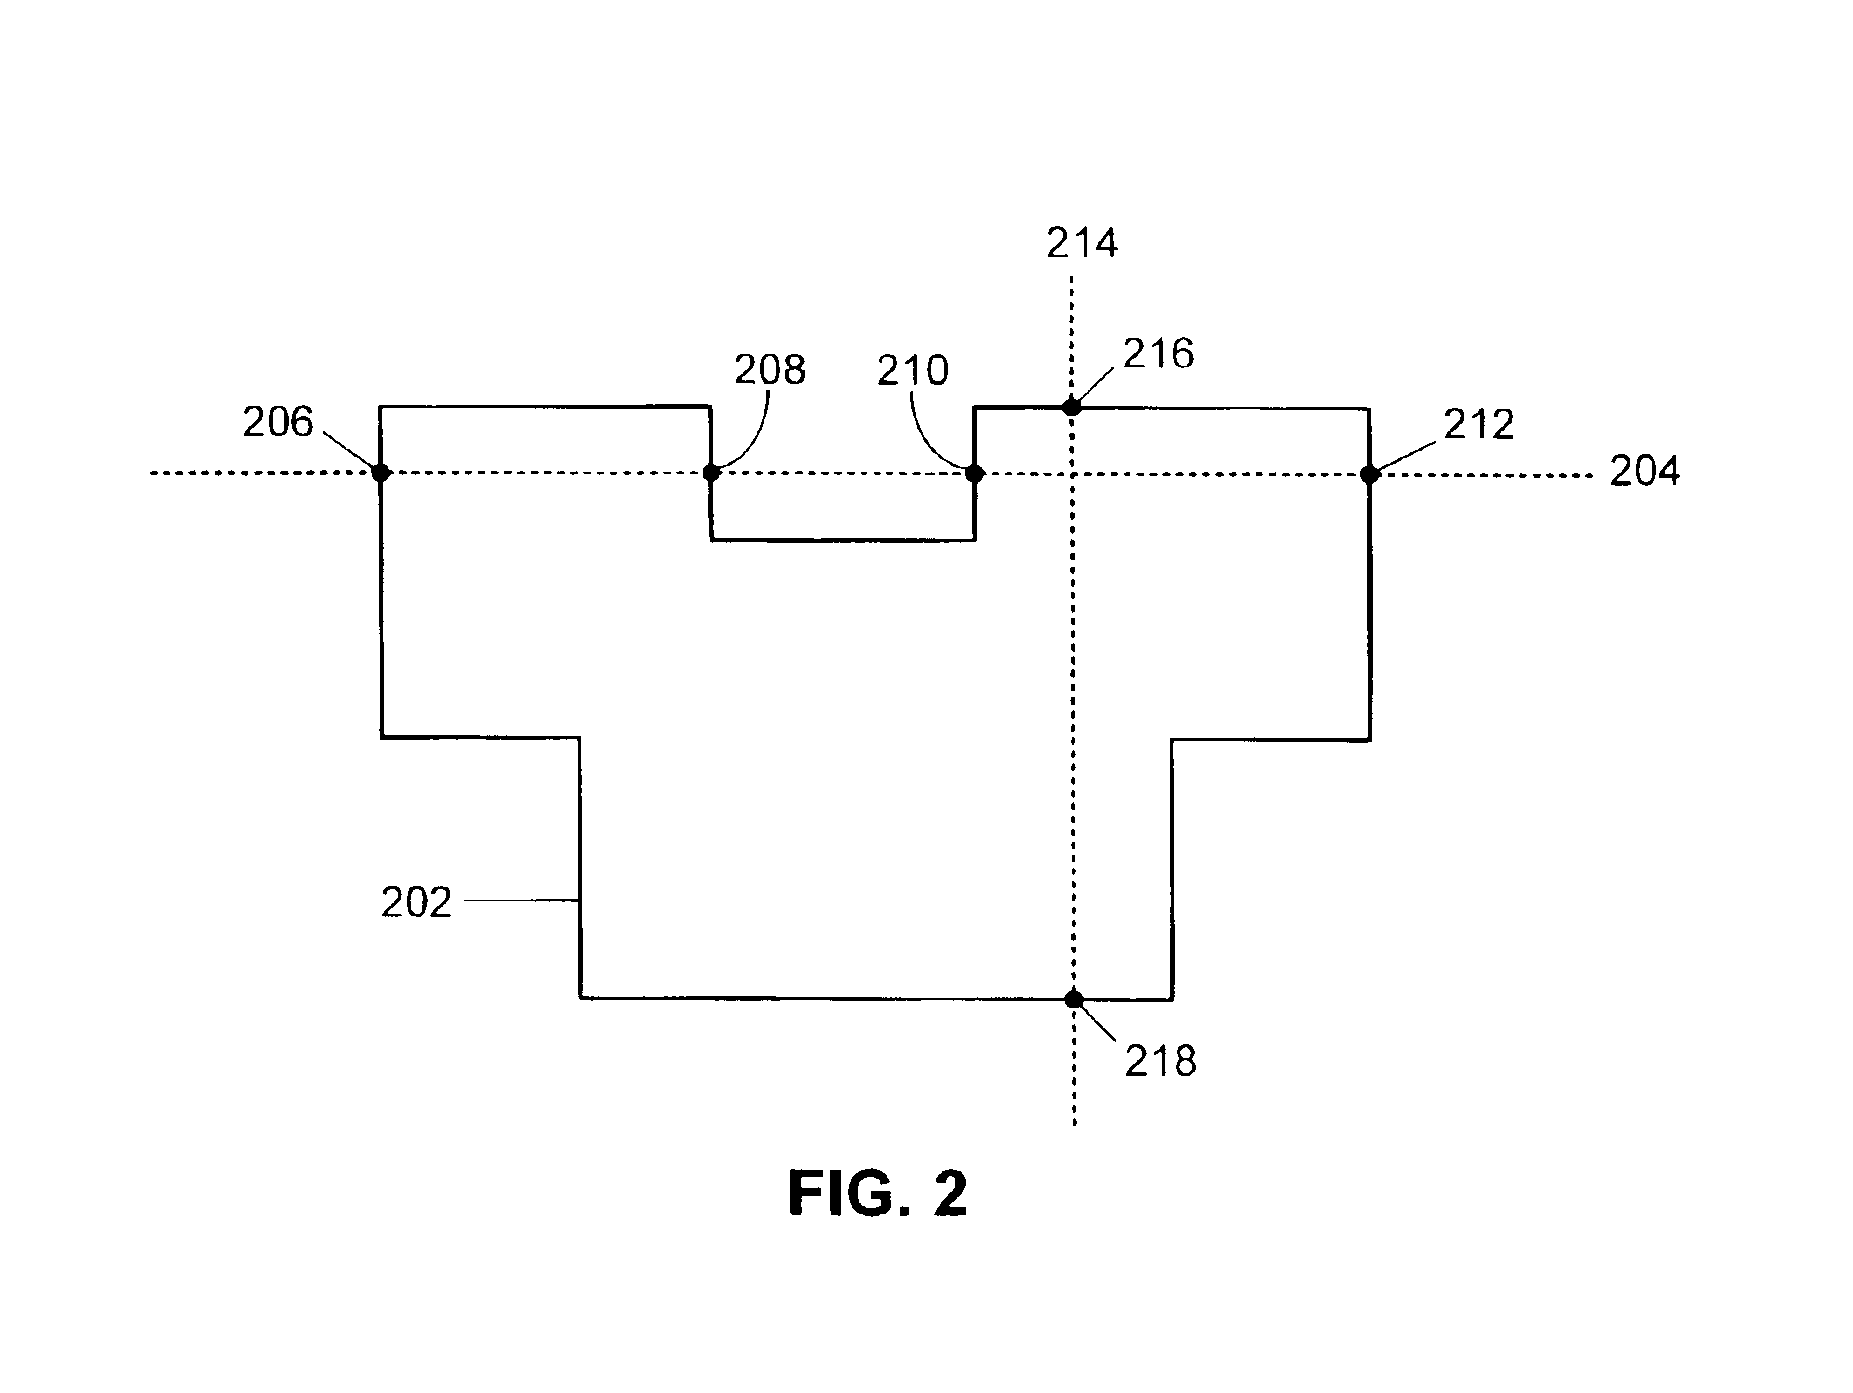 Method and apparatus for fracturing polygons on masks used in an optical lithography process